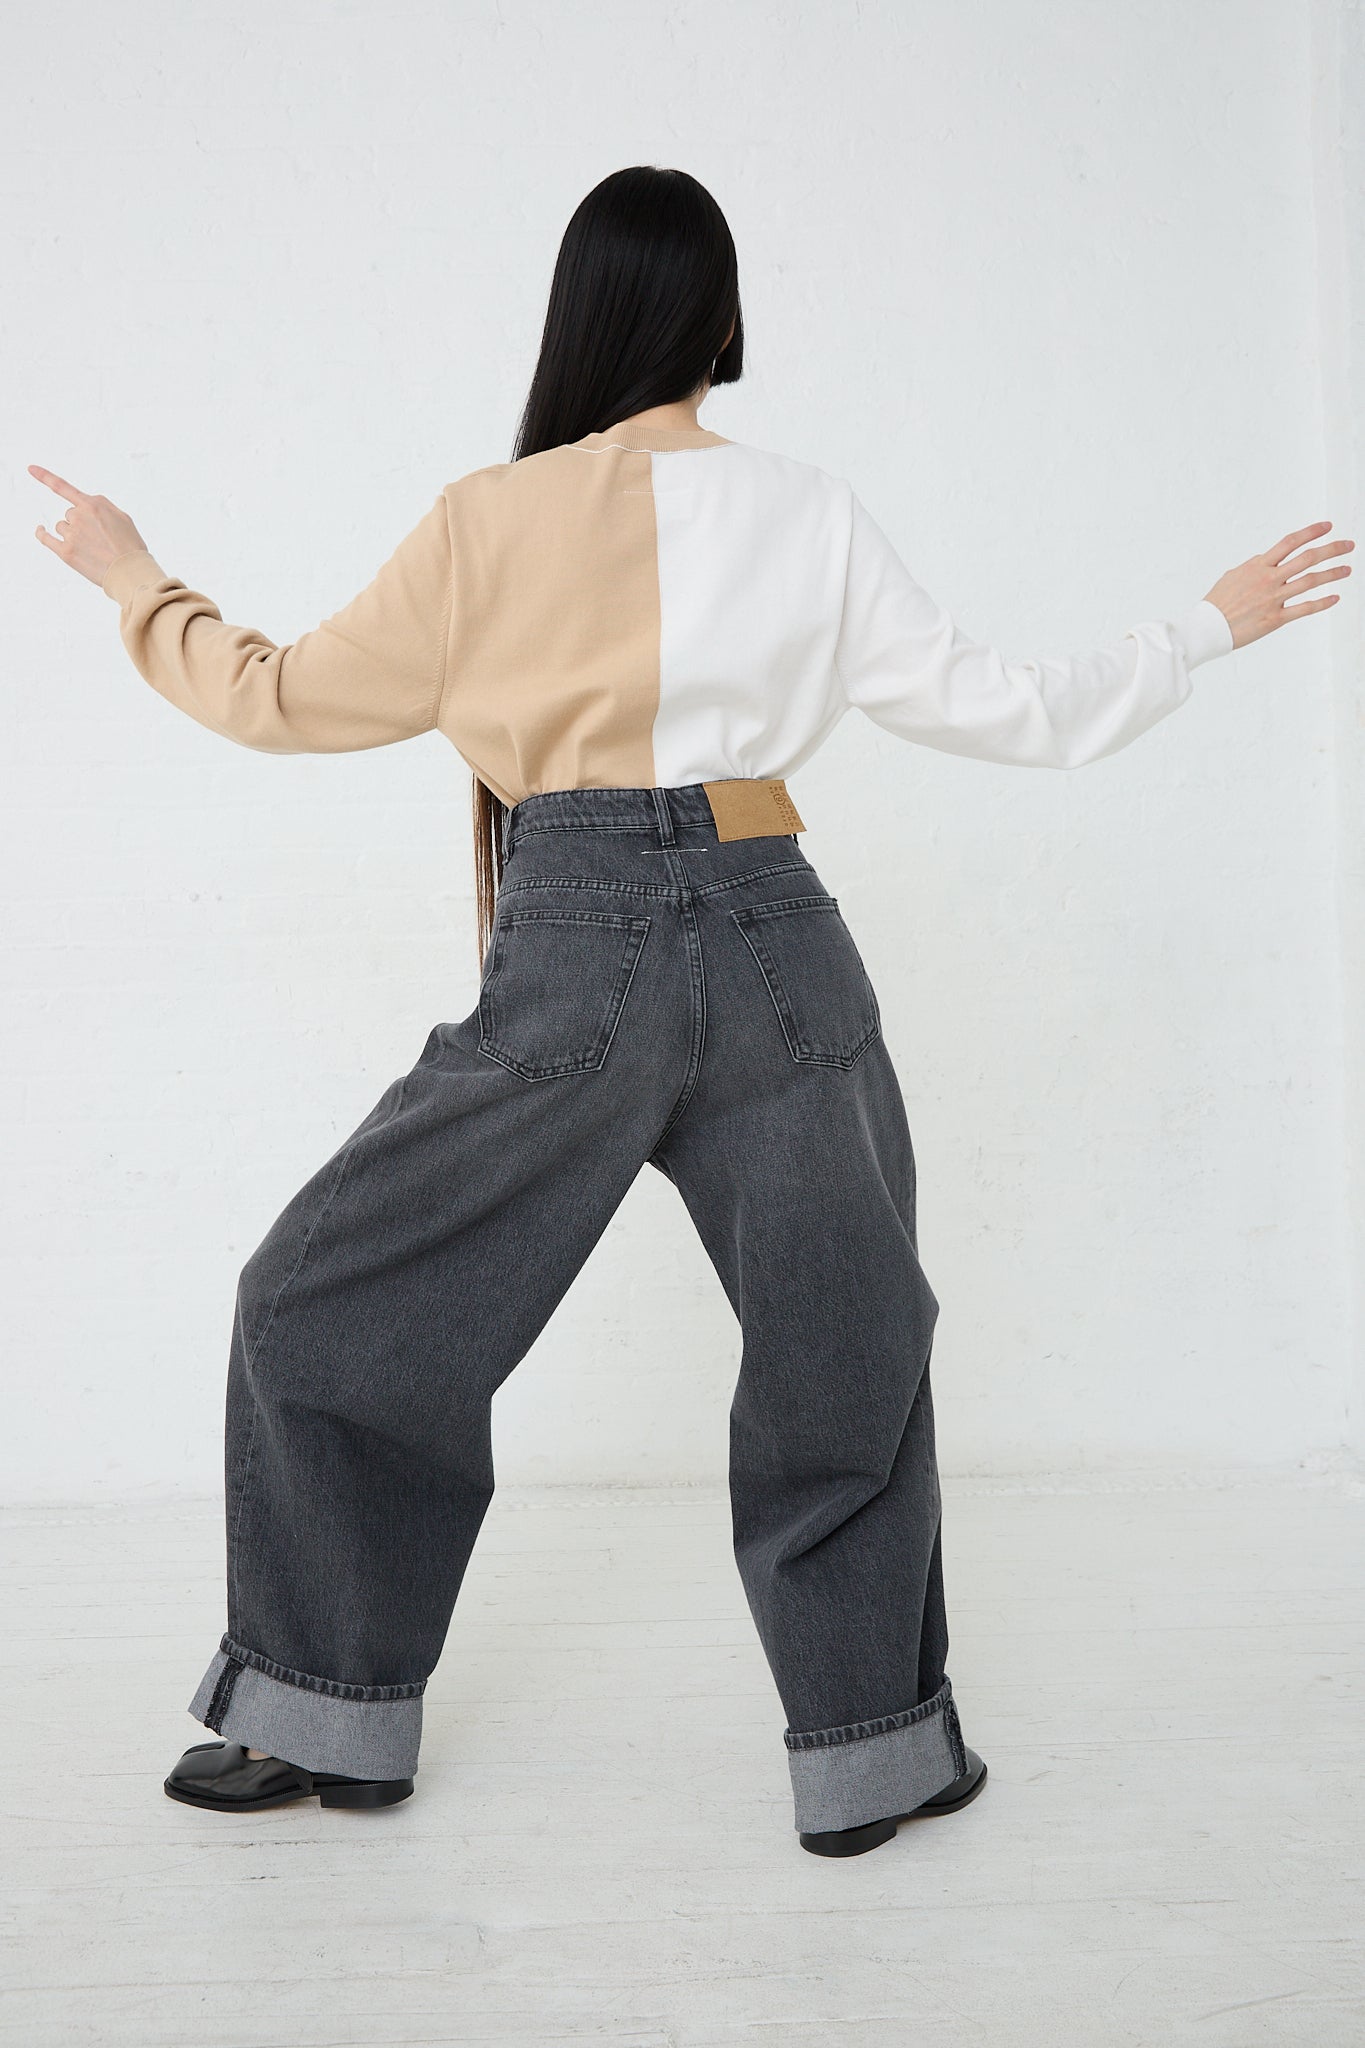 A woman is standing in a white room with her arms outstretched, wearing MM6's 5 Pocket Pant in Grey denim. Back view and full length.